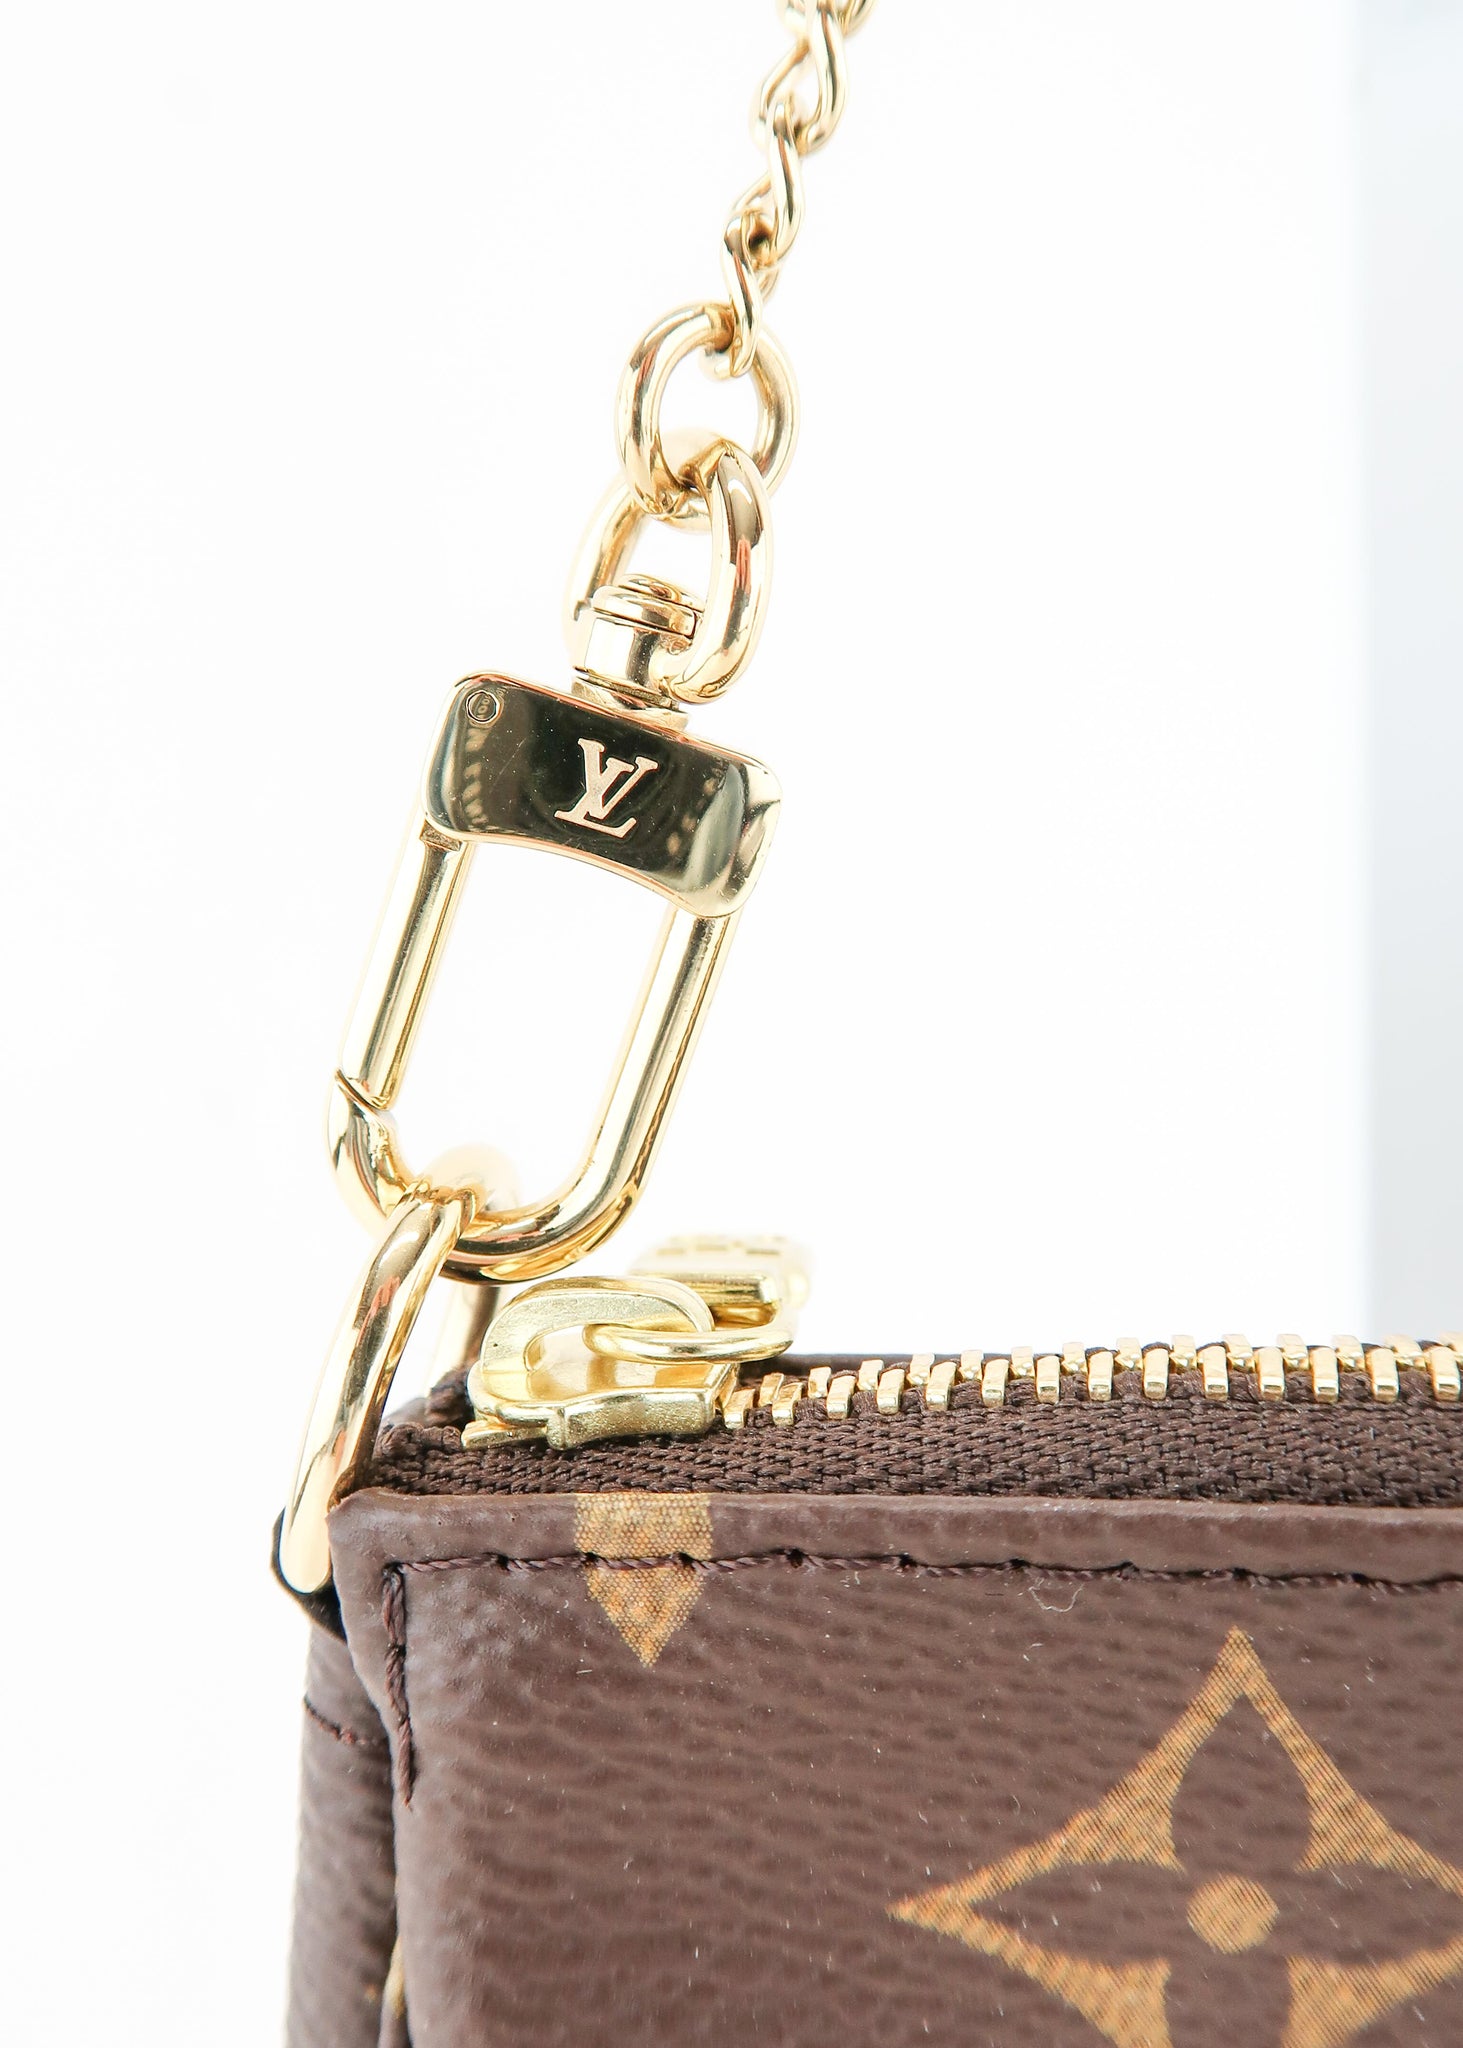 WHAT FITS INSIDE THE LOUIS VUITTON POCHETTE ACCESSORIES? IS IT